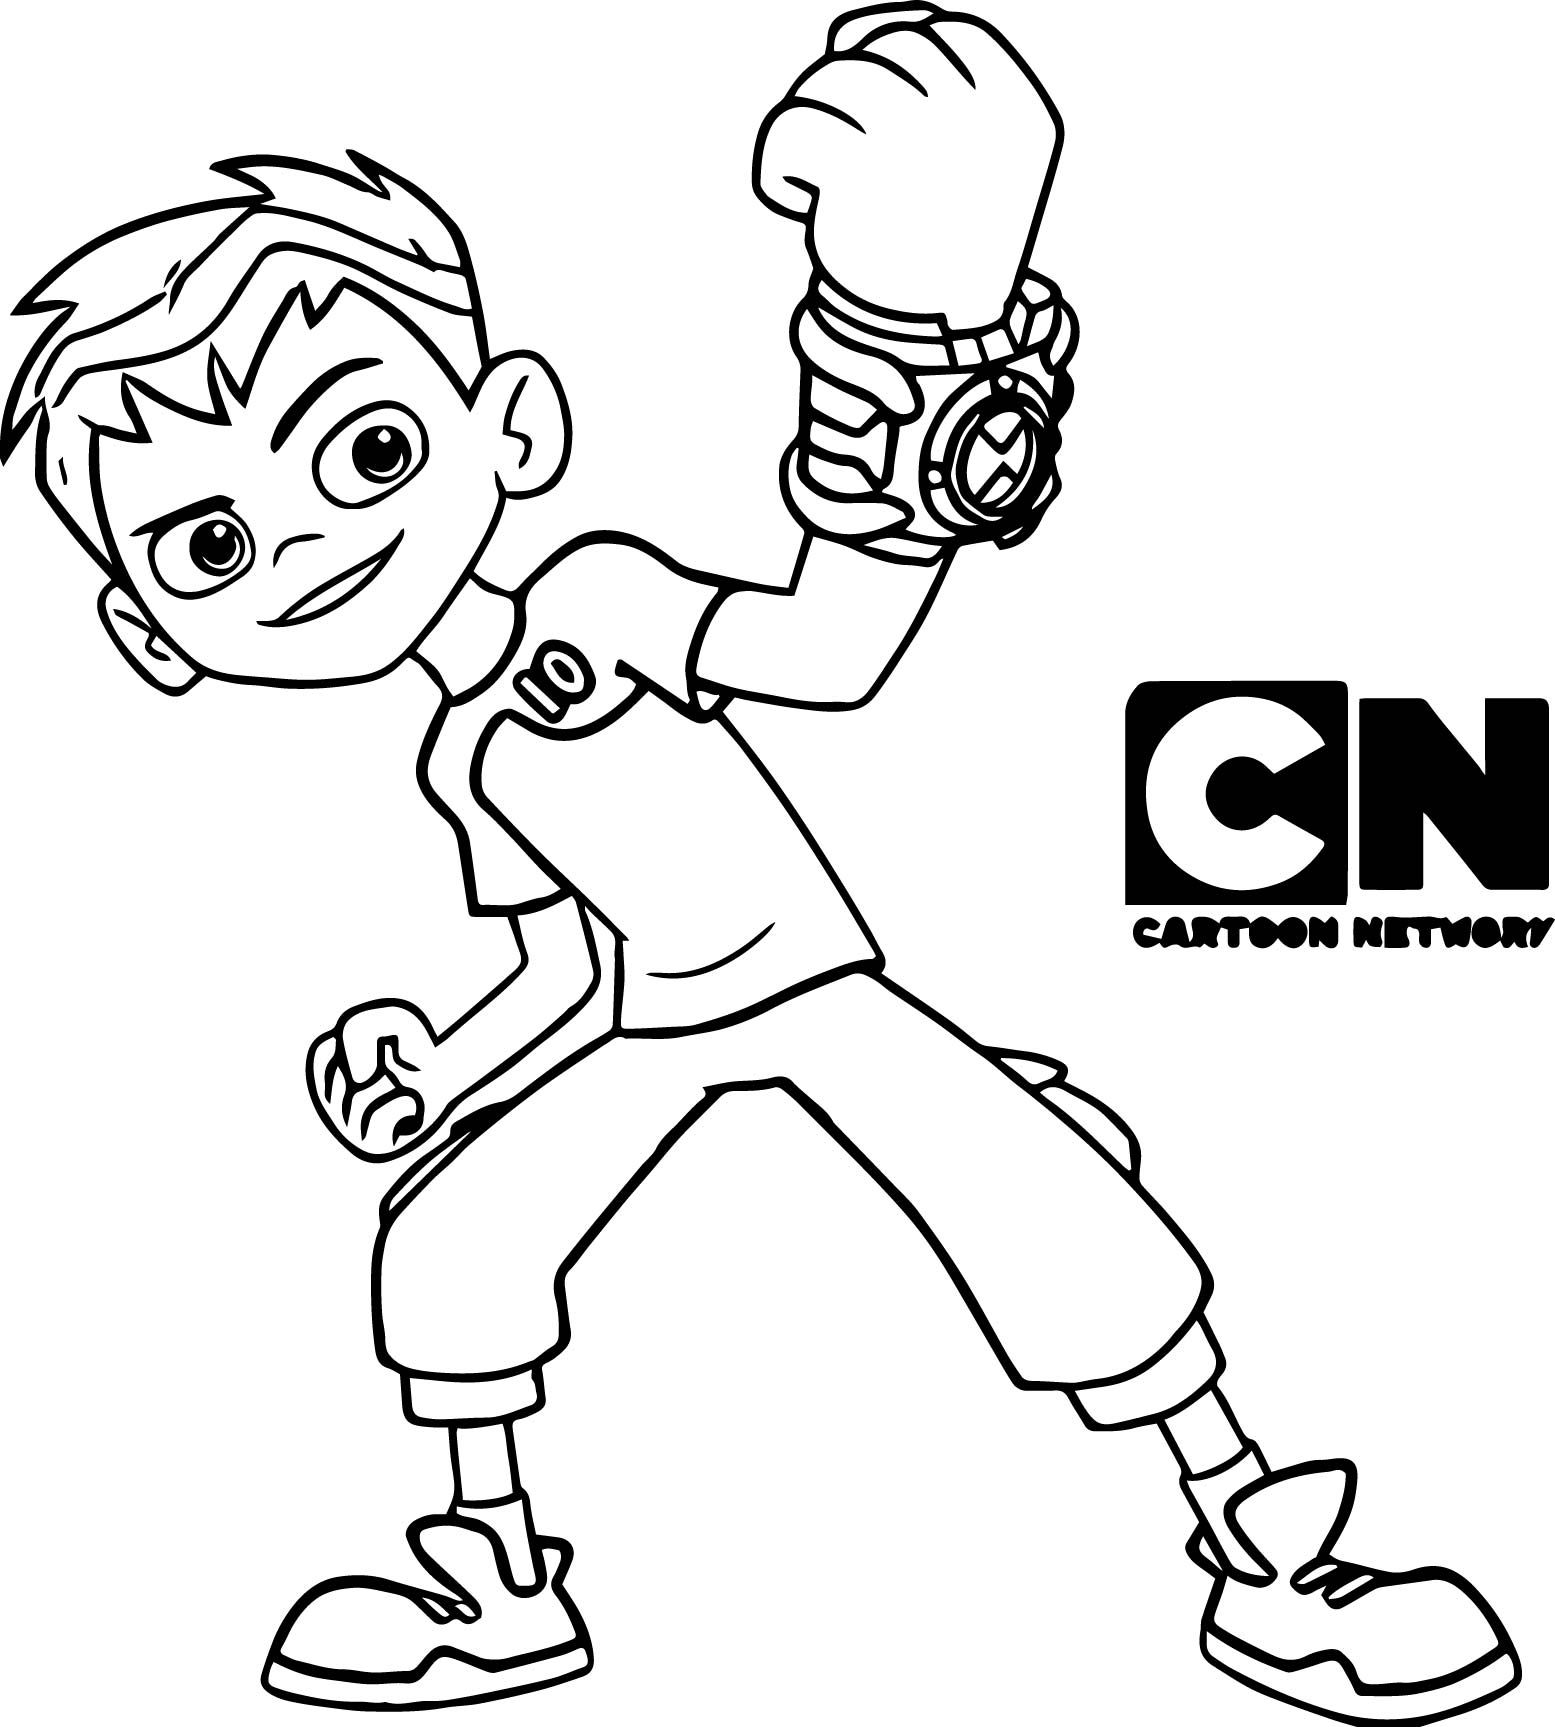 Ben 10 cartoon Coloring Pages